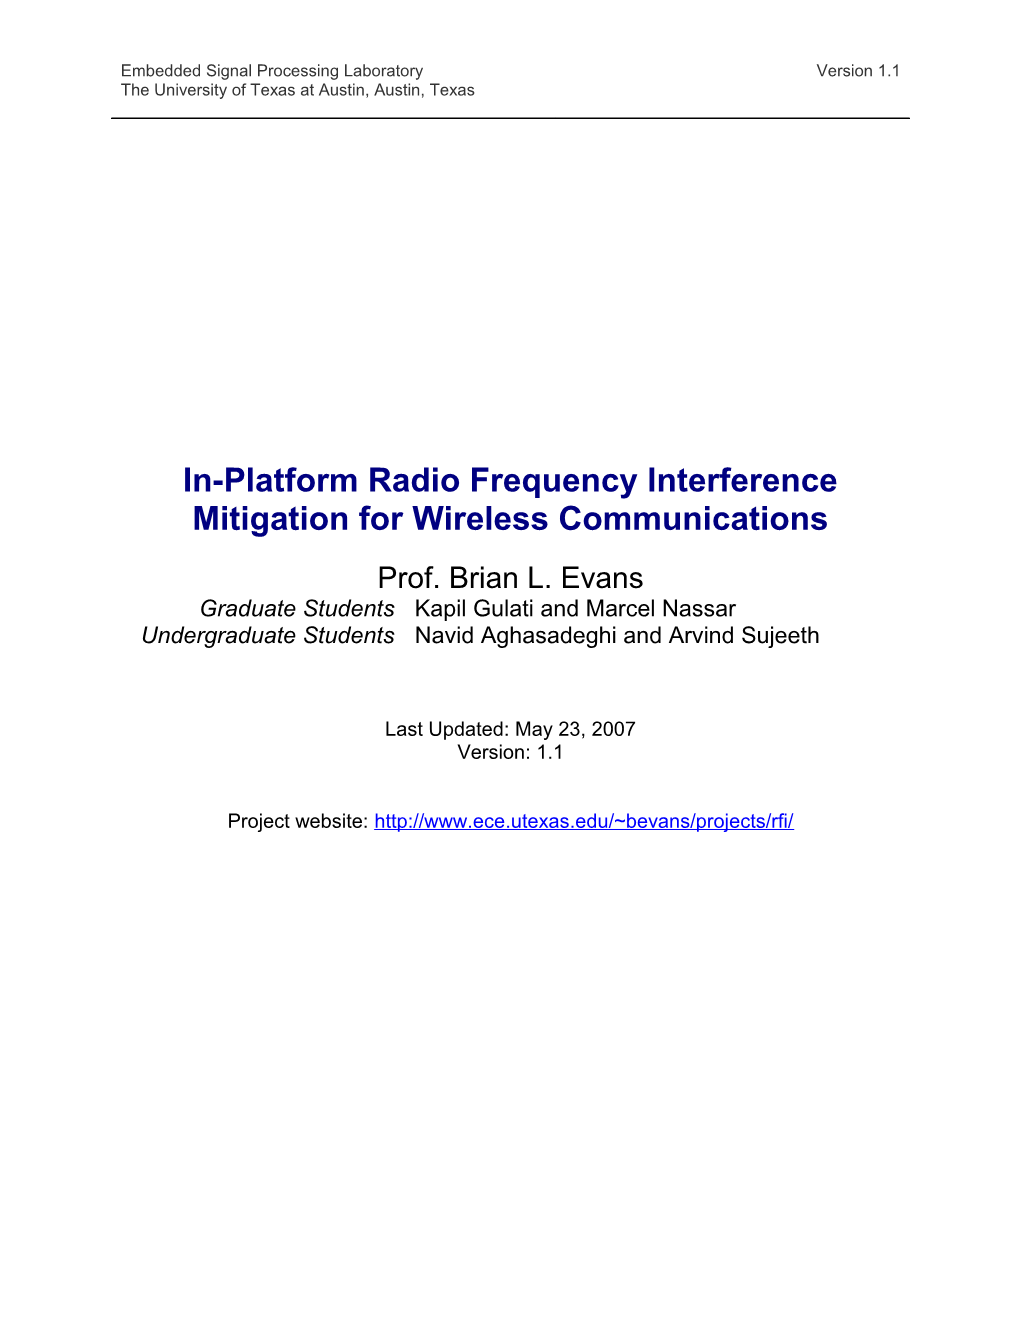 In-Platform Radio Frequency Interference Mitigation for Wireless Communications